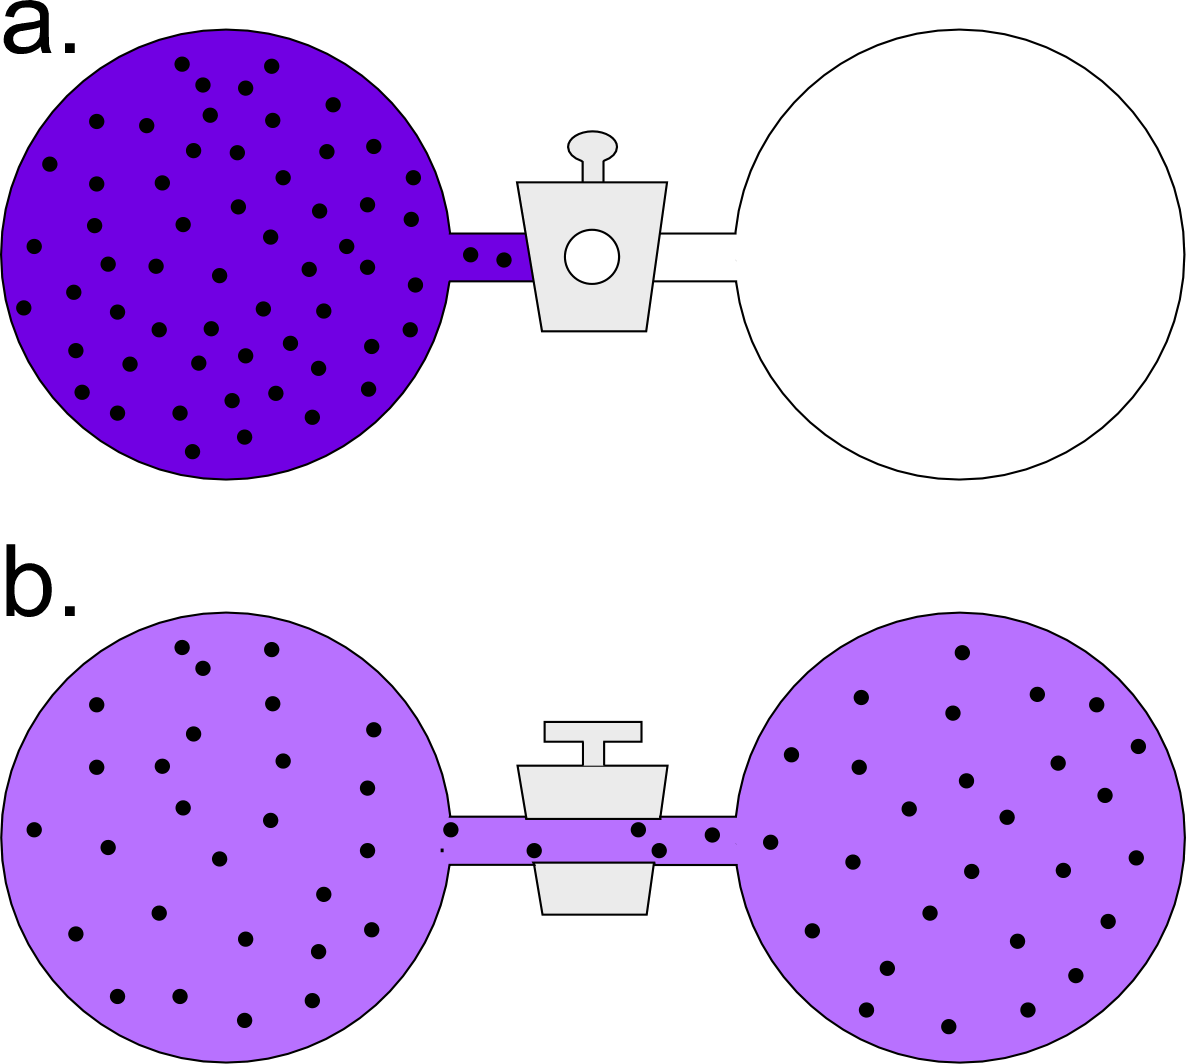 Heat transfer between objects in contact at different temperatures occurs spontaneously 
		  from the warmer to the cooler object